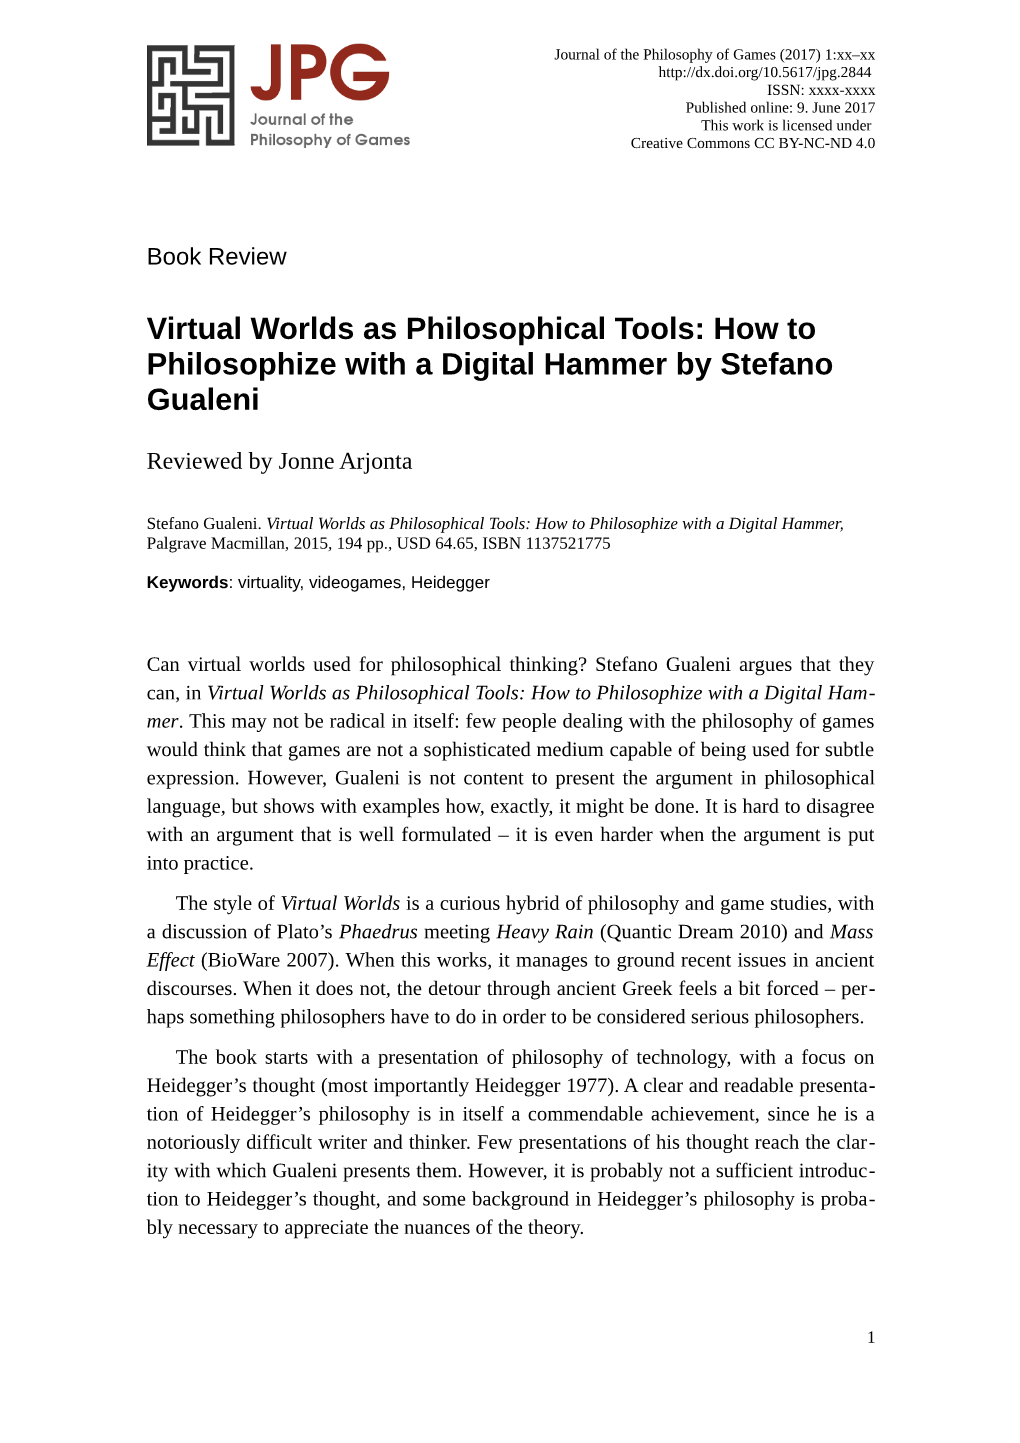 Virtual Worlds As Philosophical Tools: How to Philosophize with a Digital Hammer by Stefano Gualeni